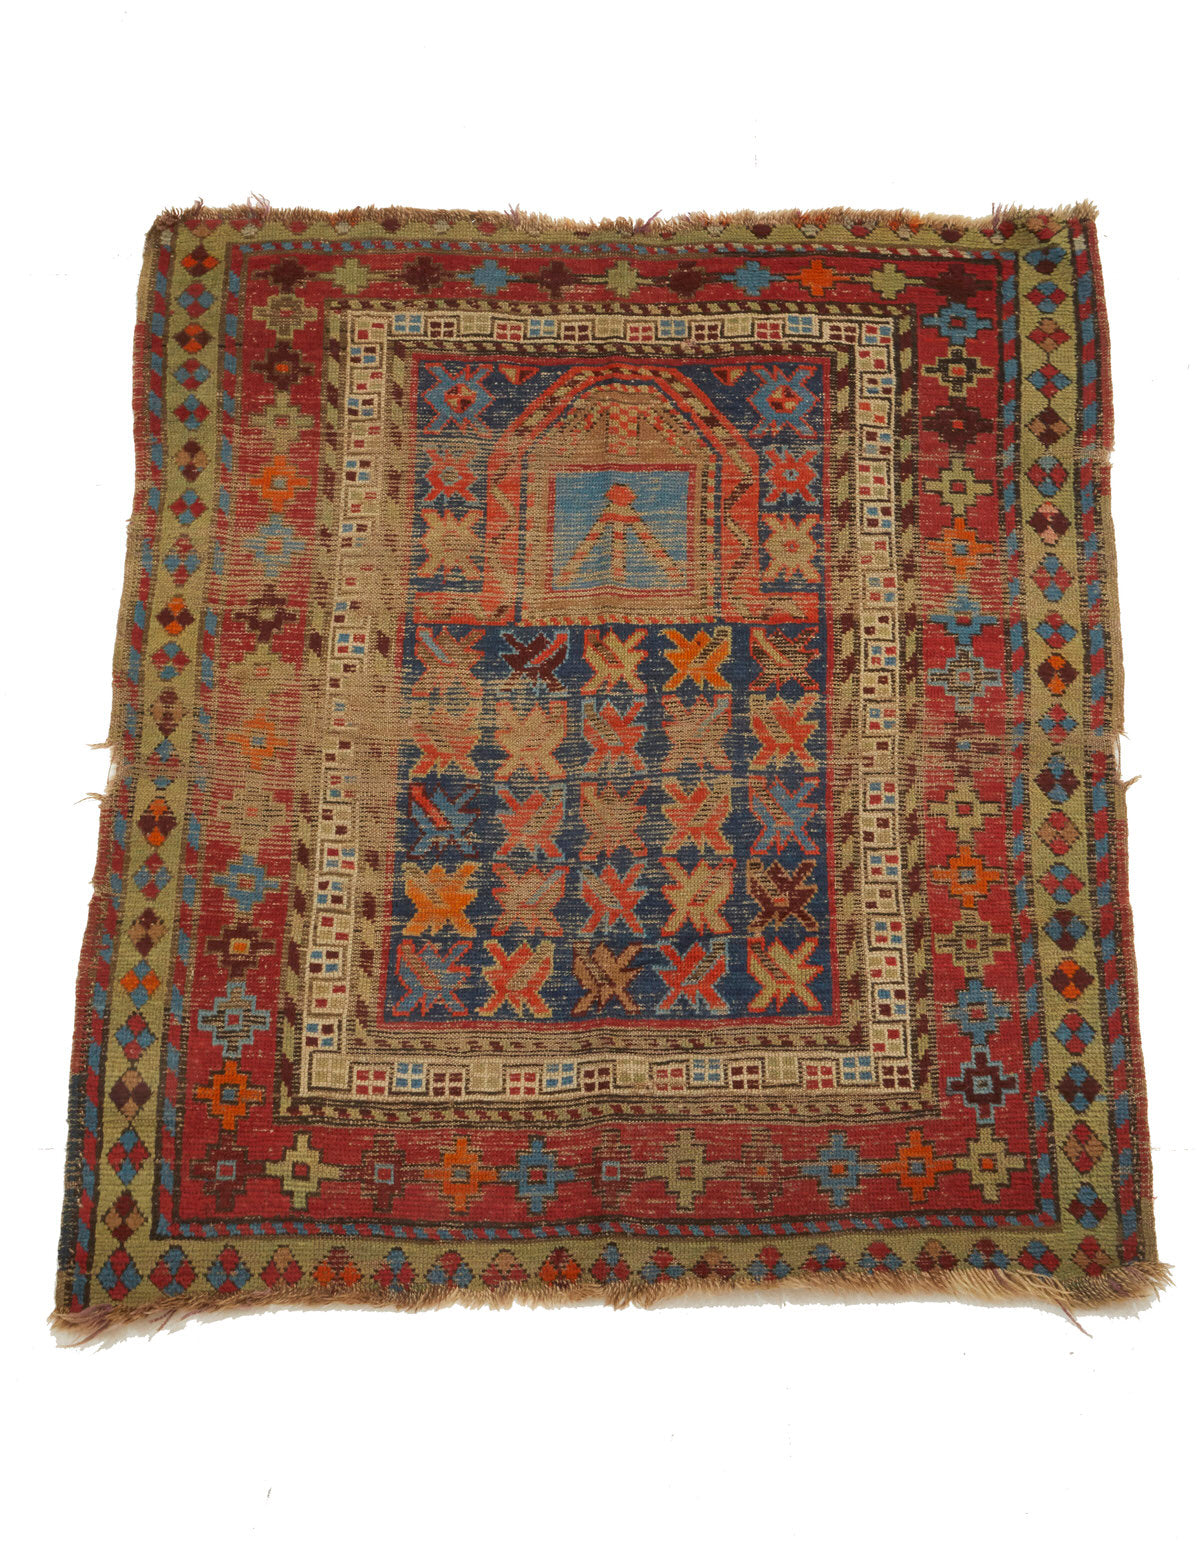 Antique hand woven Kazak Caucasian Persian Rug with tan, red, blue and pale green colors - Available from King Kennedy Rugs Los Angeles 